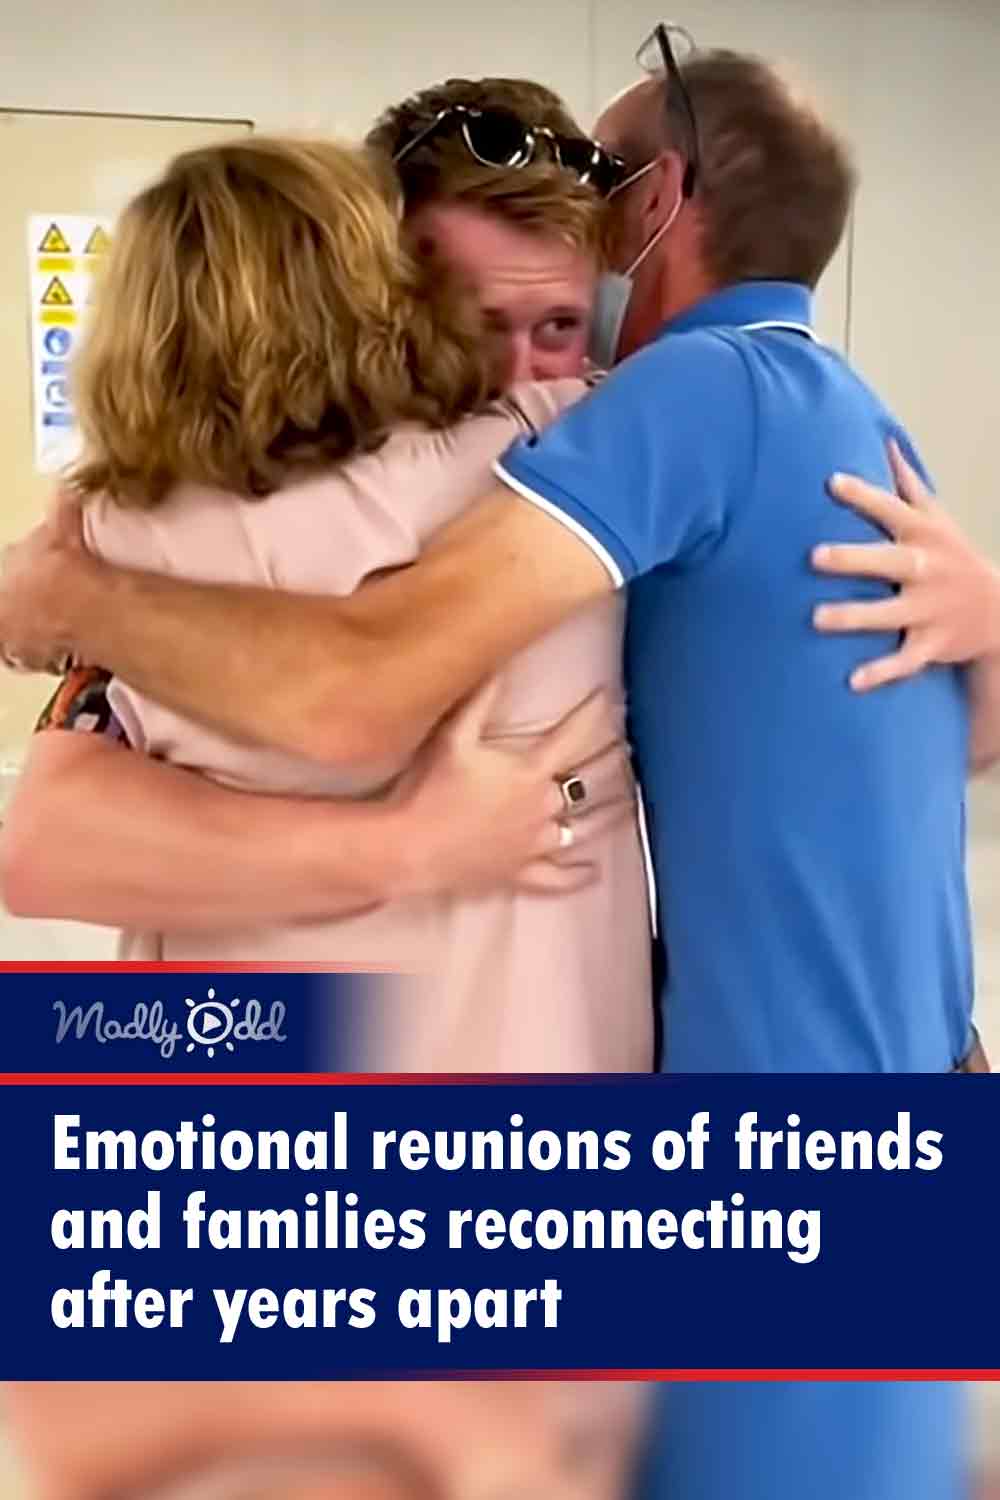 Emotional reunions of friends and families reconnecting after years apart